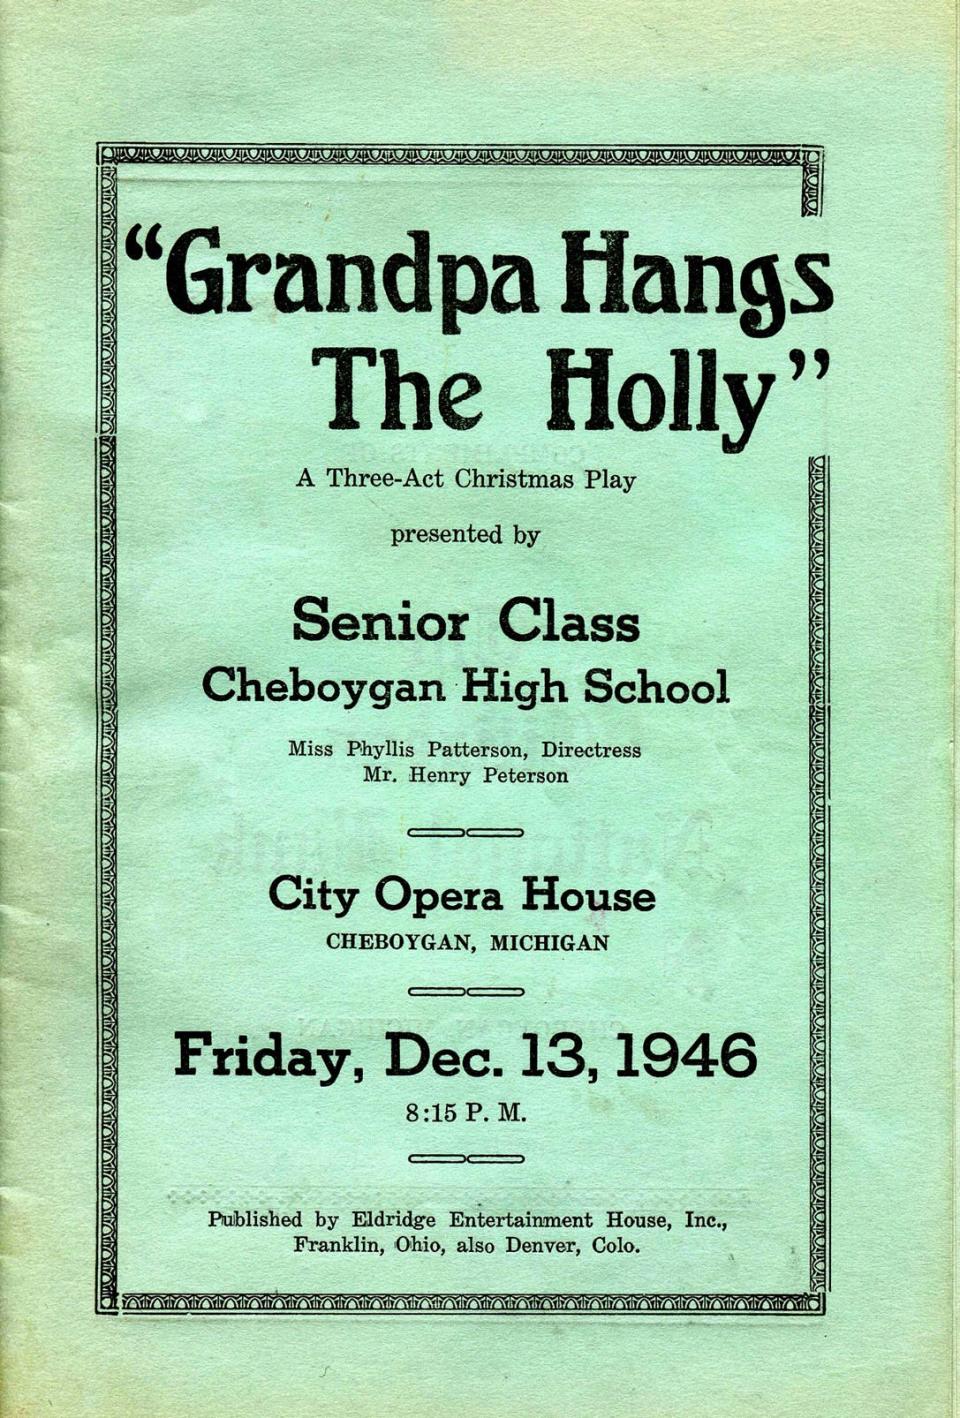 Cover of the program “Grandpa Hangs the Holly” from 1946.